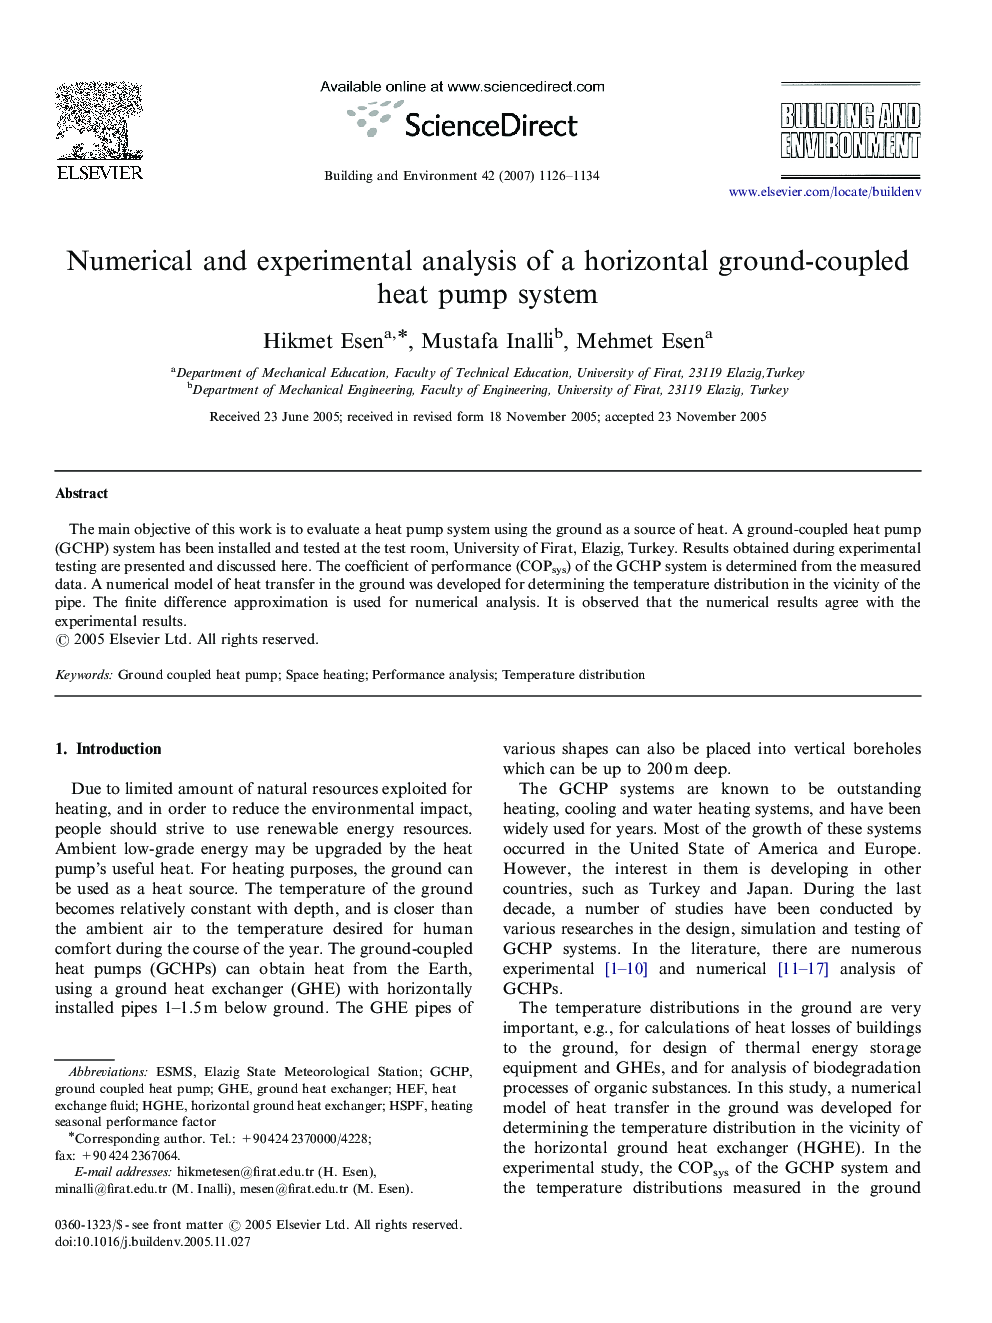 Numerical and experimental analysis of a horizontal ground-coupled heat pump system